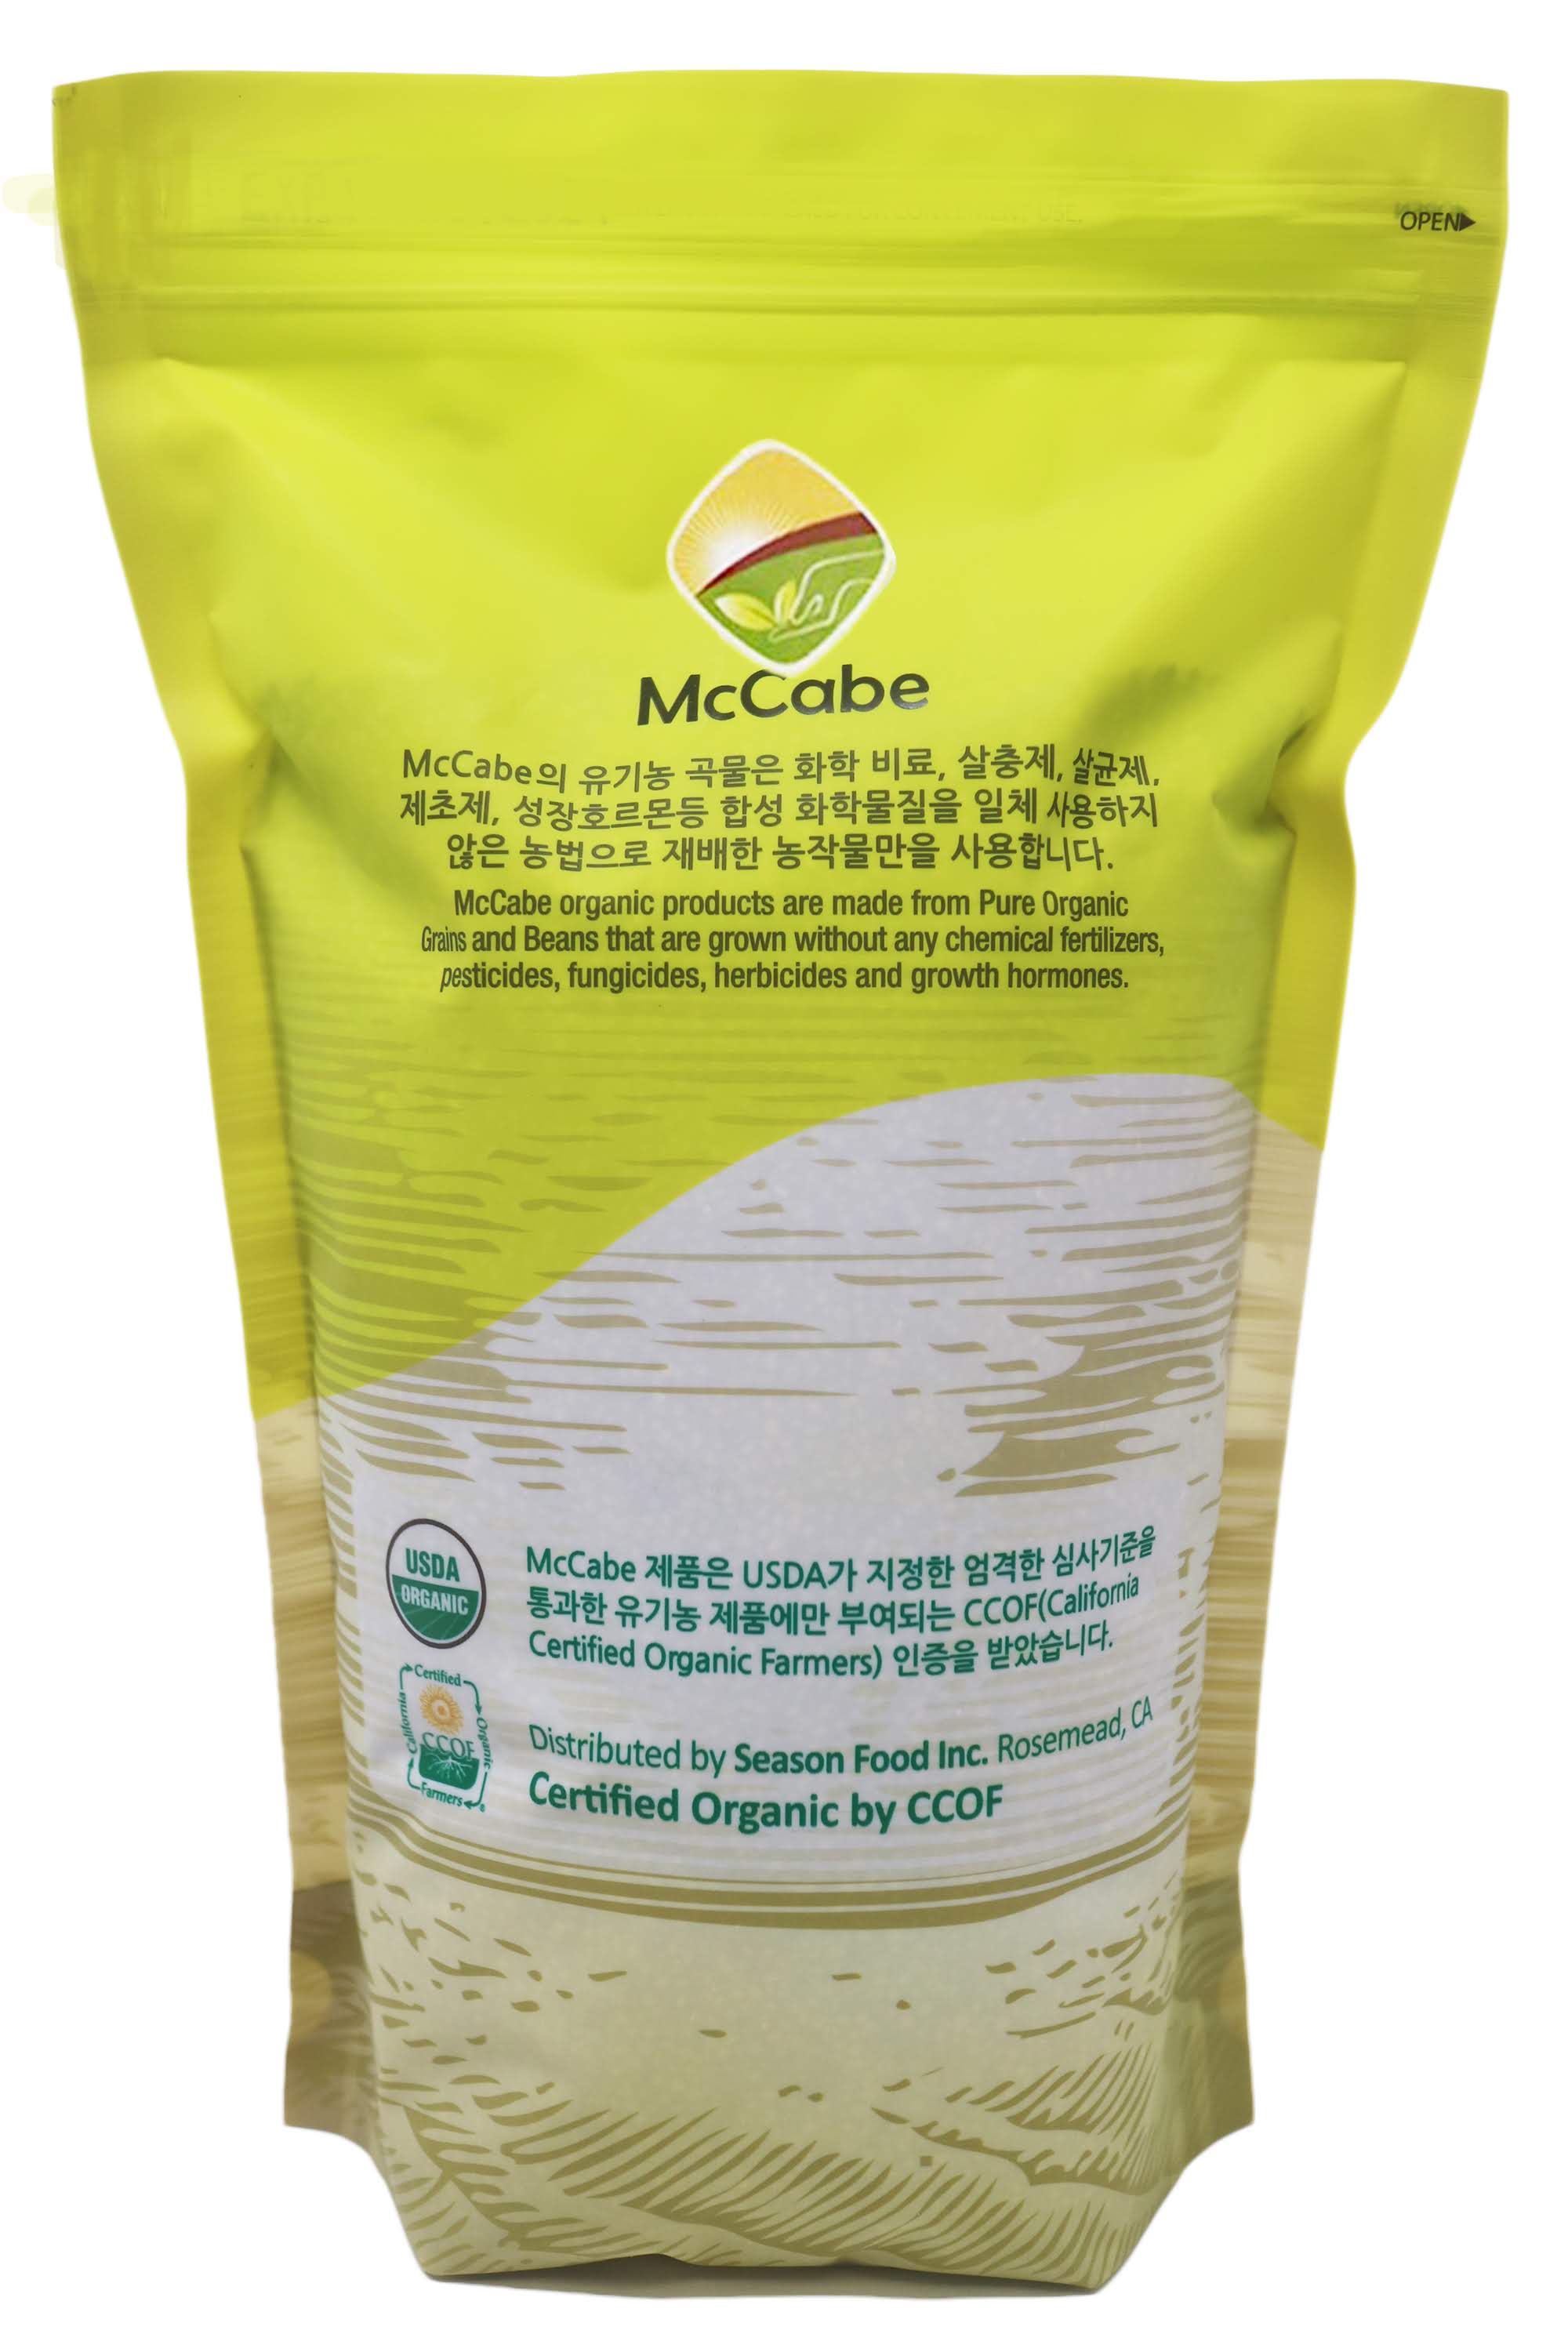 McCabe Organic Raw Perilla Seeds - Raw Perilla Seeds 1.5 Lbs | USDA and CCOF Certified | Packed in USA - image 3 of 6